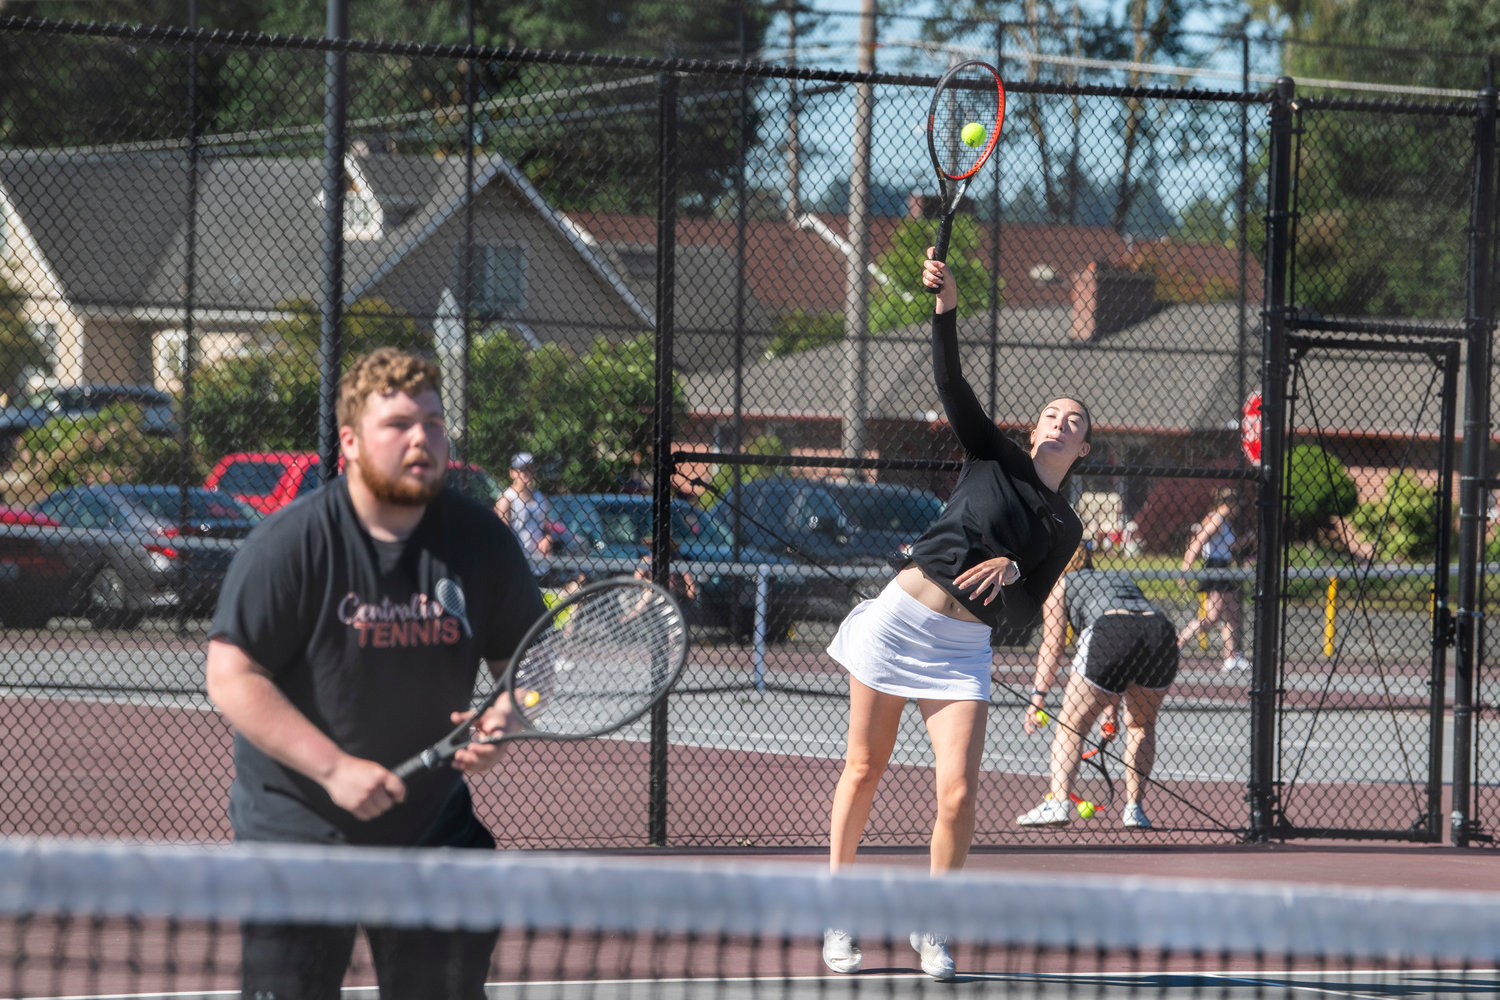 Claire Kuykendall, a Bearcat, serves during a doubles match with Ryan Mack, a Centralia graduate, during the Jack State Tennis Tournament at W.F. West High School on Saturday.